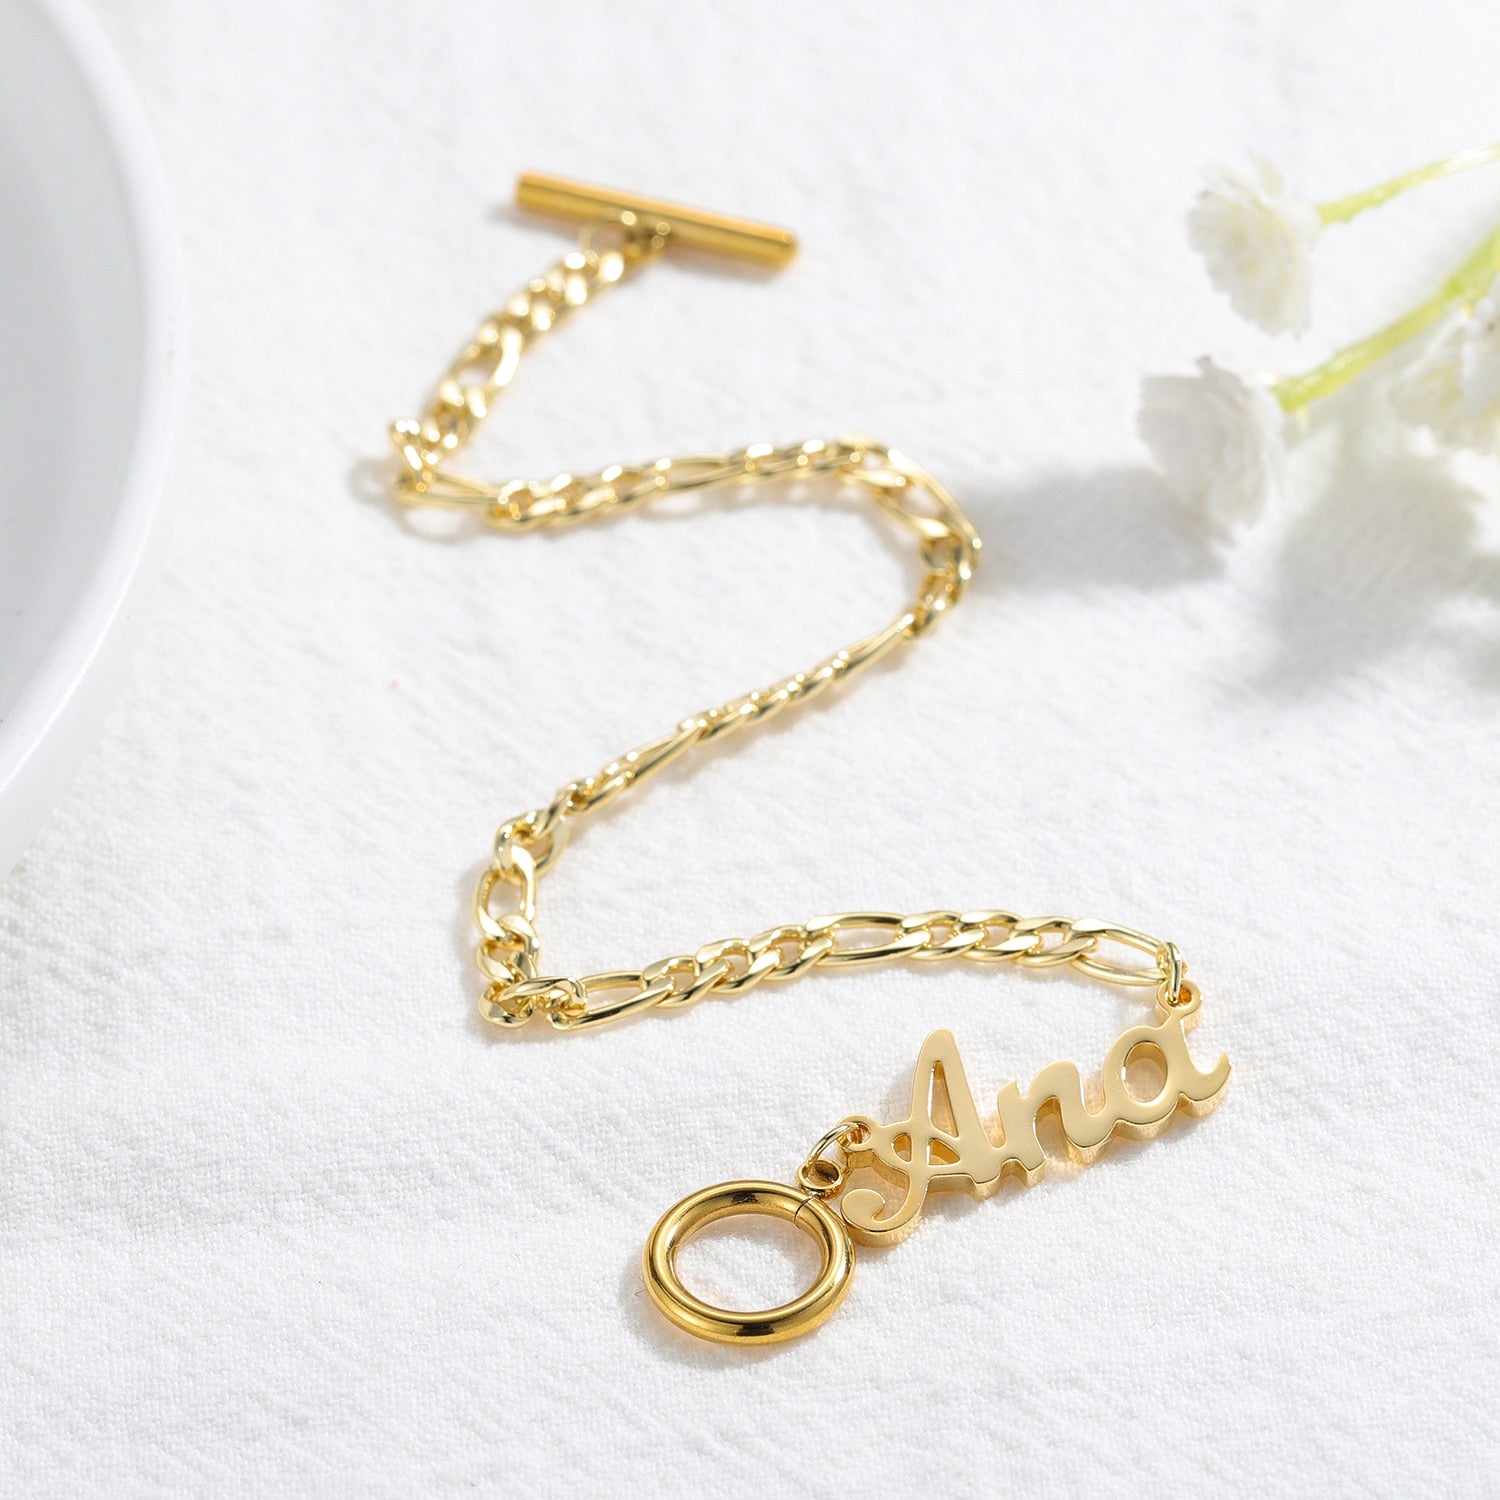 Personalised Name Gold T Bar Bracelet with Toggle Clasp